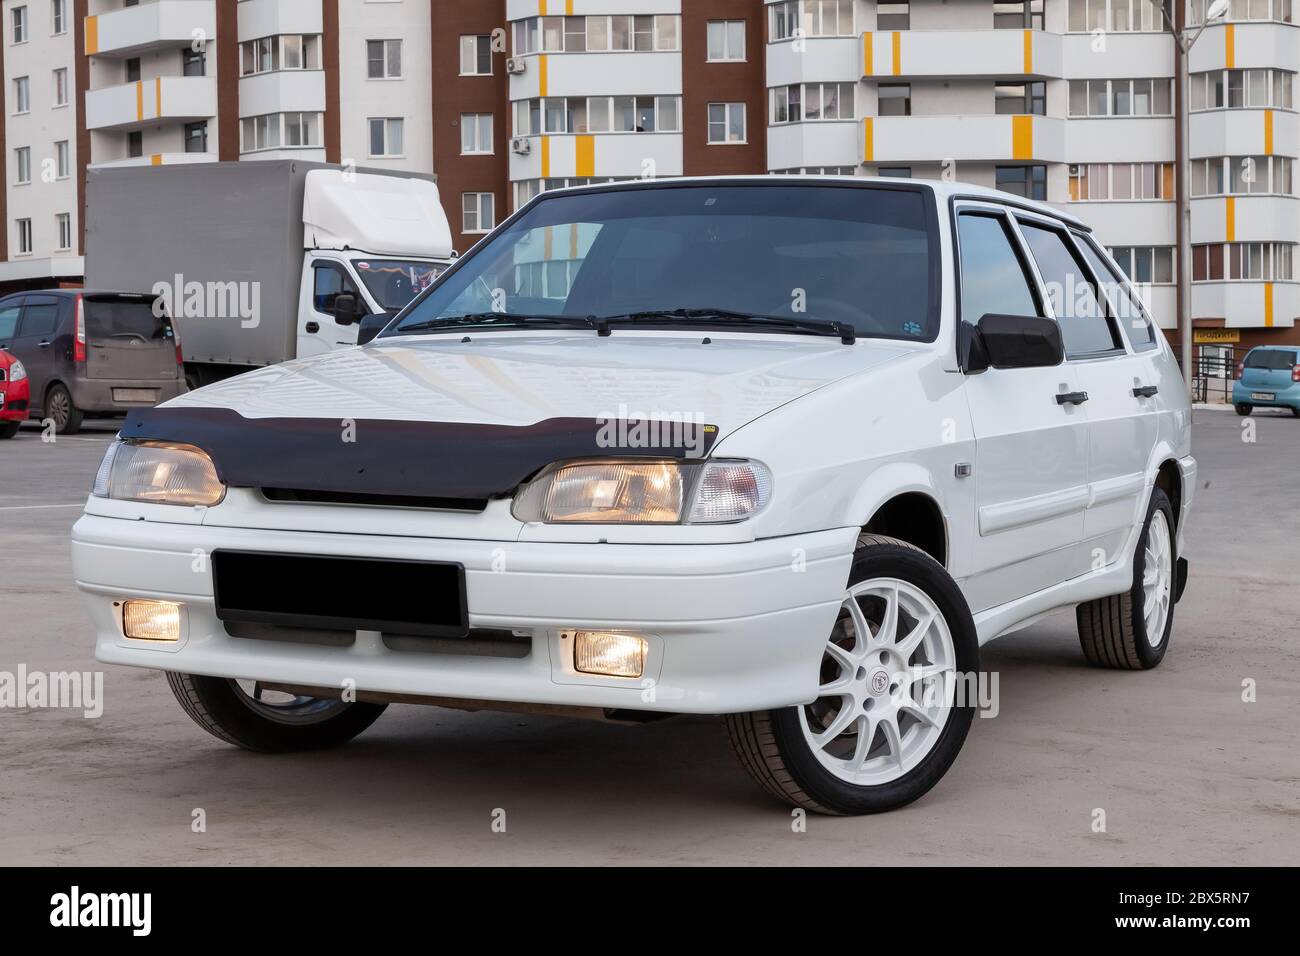 Novosibirsk, Russia - 05/20/2020: A new Russian car of the Lada brand of the automotive industry VAZ model 2114 of a modern white series with burning Stock Photo